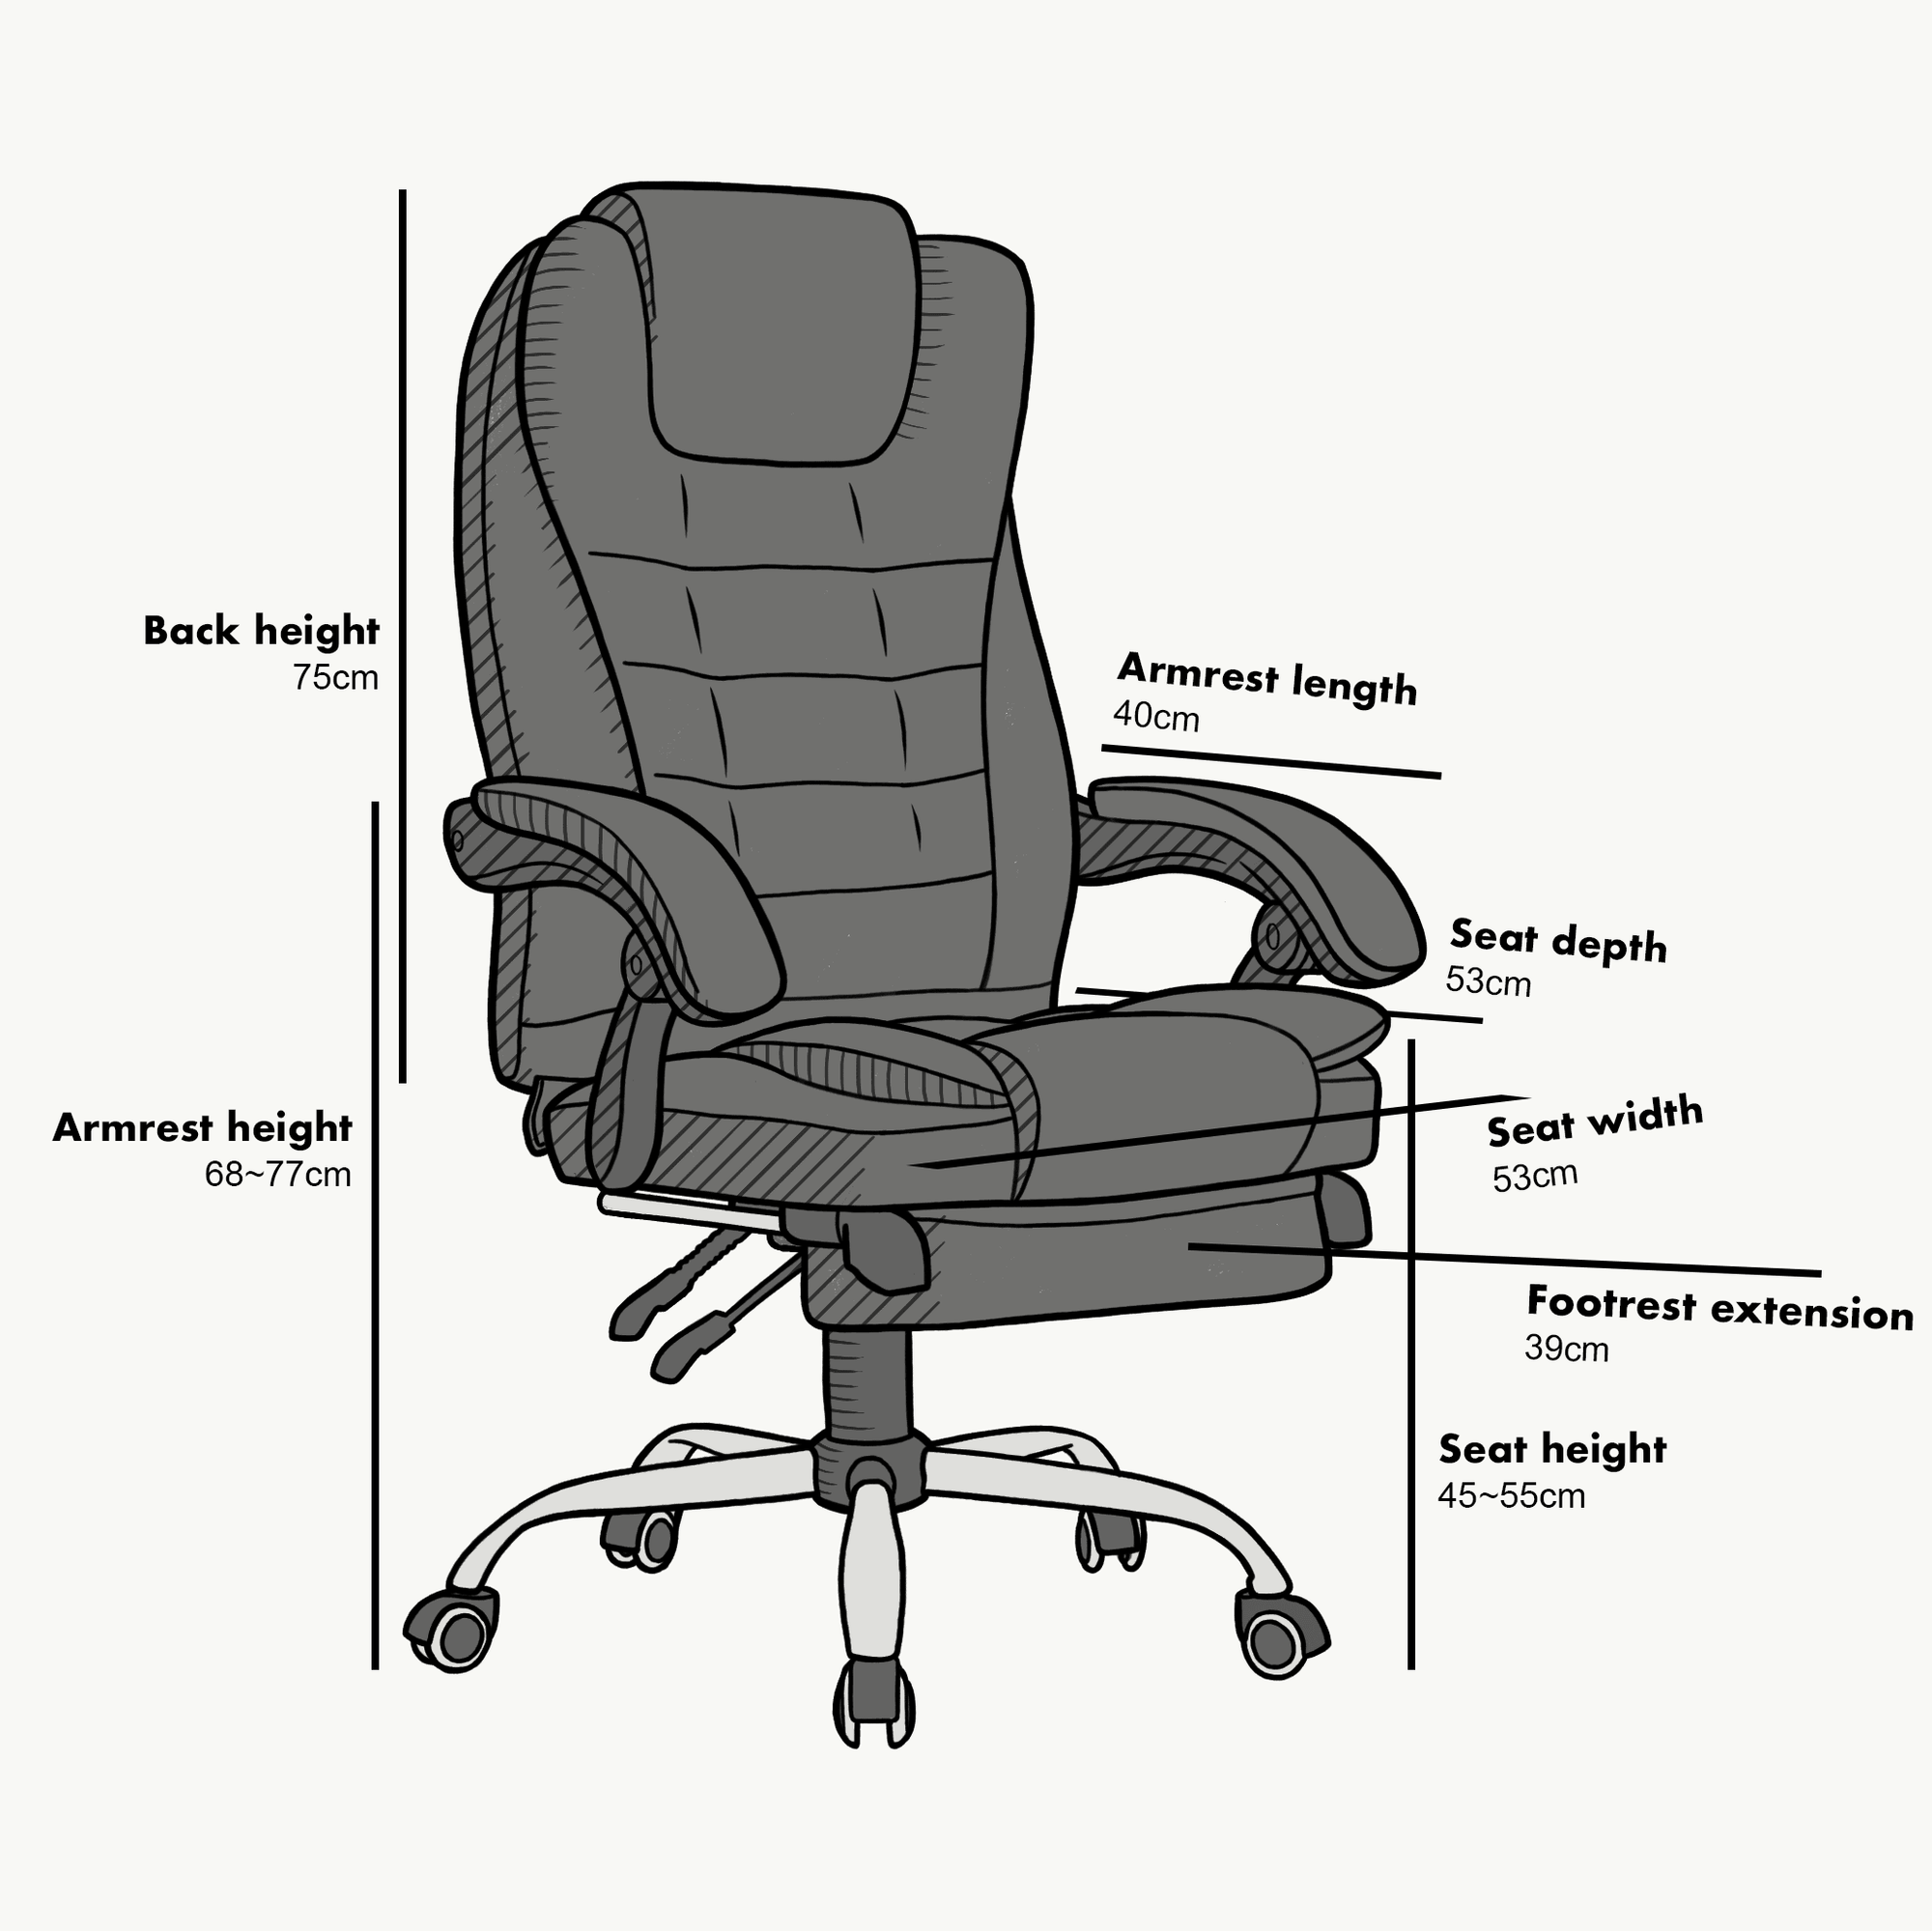 Executive Reclining Computer Desk Chair with Footrest, Headrest and Lumbar Cushion Support Furniture, MR34 Cream PU Leather